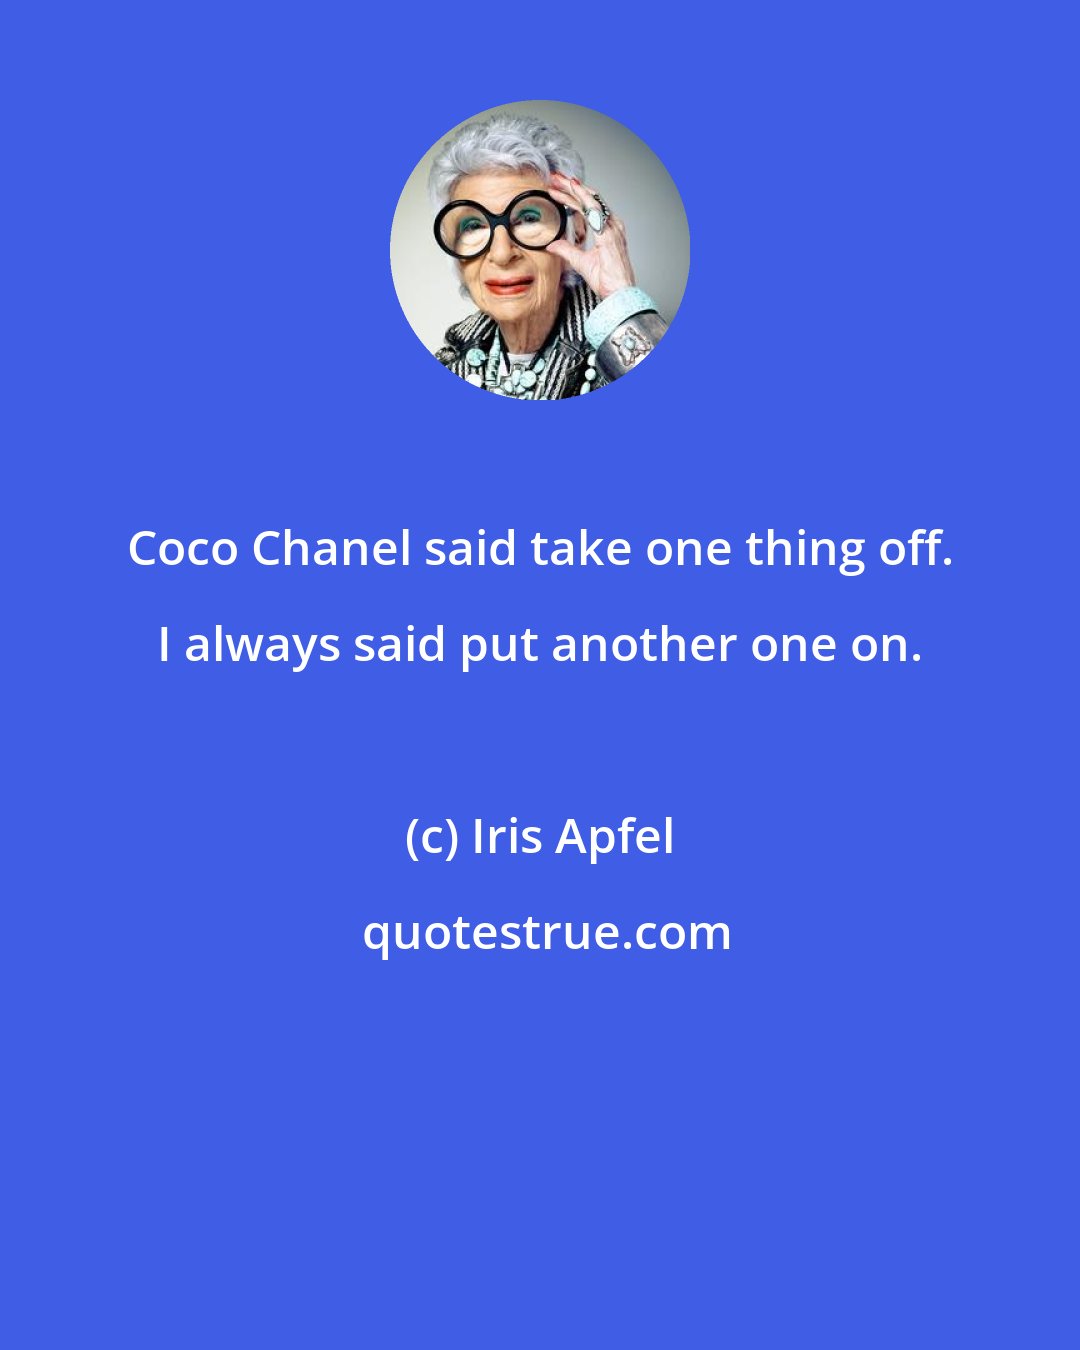 Iris Apfel: Coco Chanel said take one thing off. I always said put another one on.